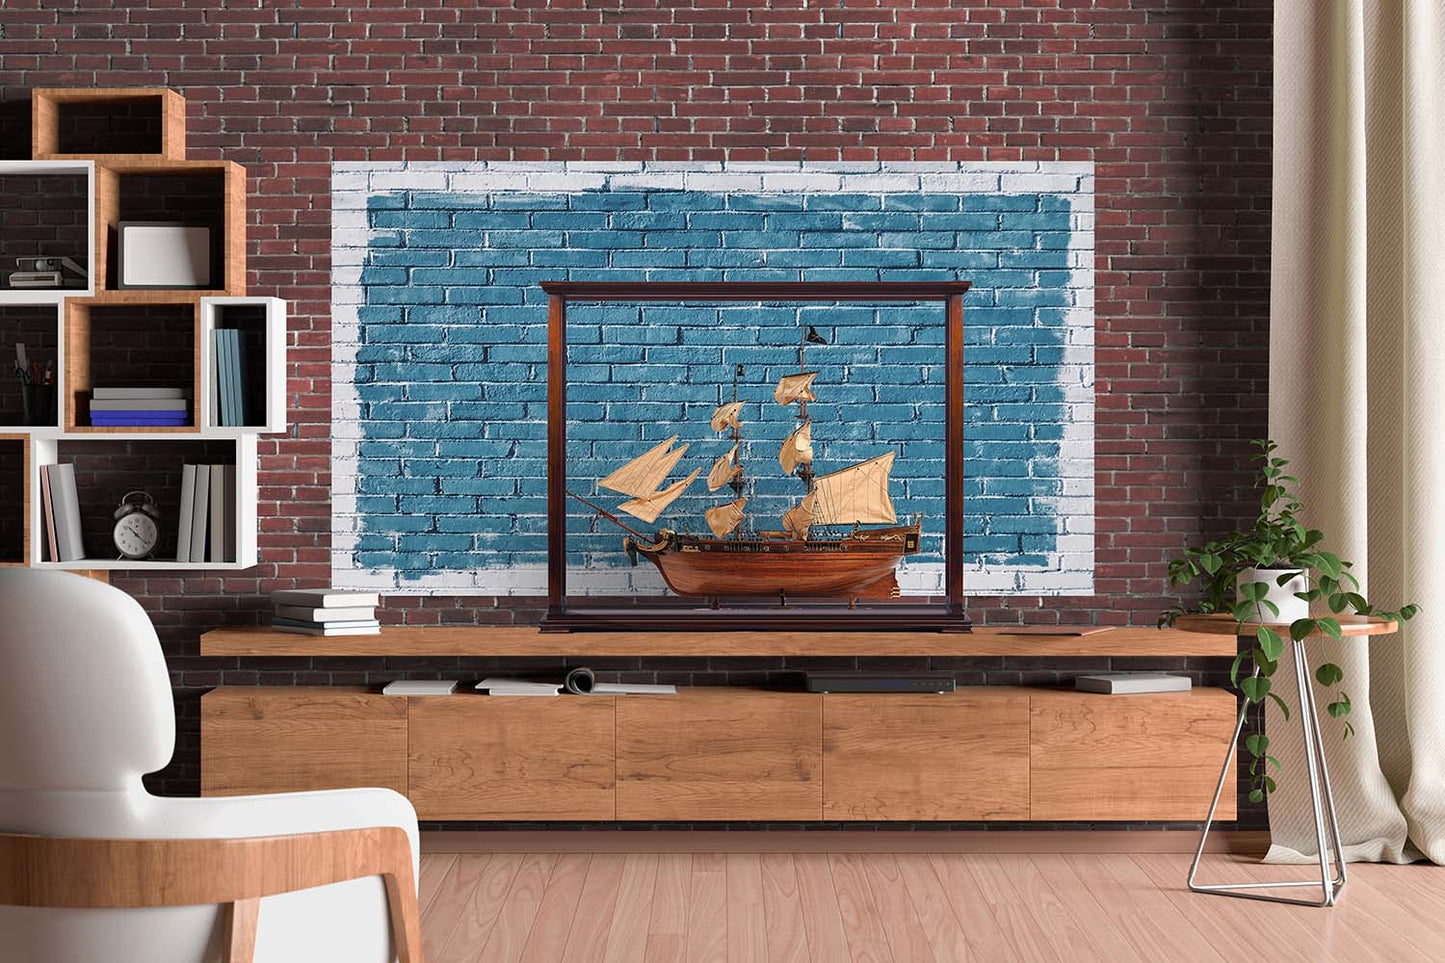 ALDO Creative Arts Collectibles Scale Model Outside: L: 34 W: 13 H: 31.5 Inches /   Inside: L: 32.5 x W: 12 x H: 29 inches. / NEW / Wood with plexiglass panels Display Case Cabinet Table Top For Midsize Tall Ship Yacht Boat Models With Plexiglass Panels